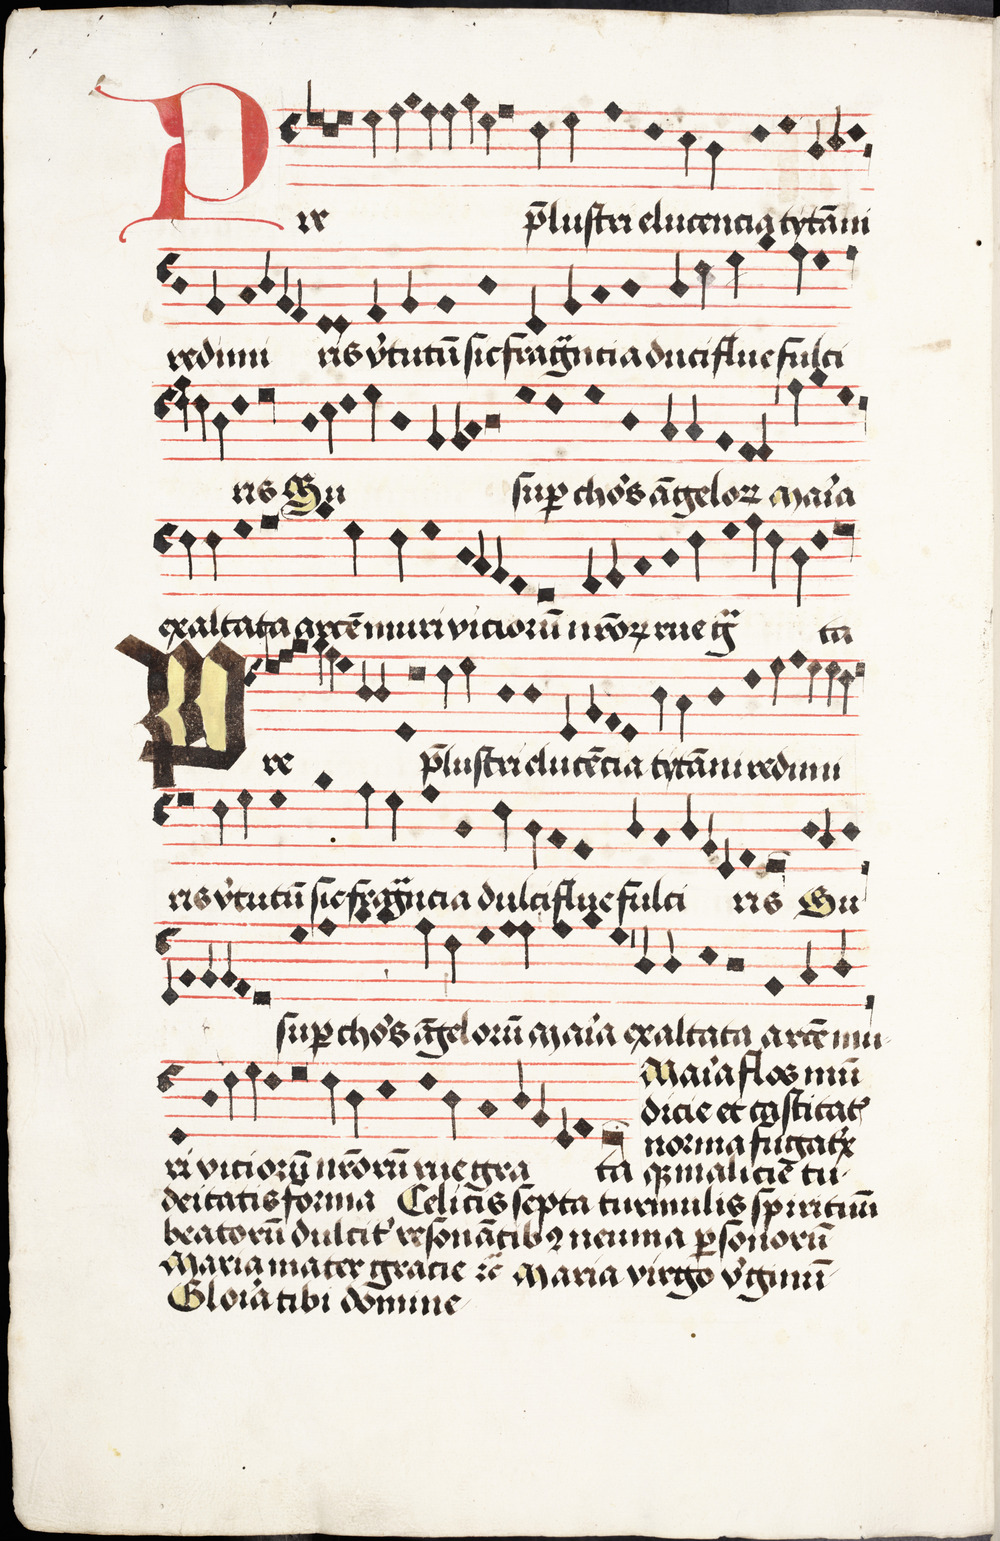 The two-part song “Prelustri elucencia”. A Hussite Latin gradual from Vyskytná by the scribe Martin Baccalarius of Kolín from the year 1512. Collection of the National Museum in Prague – National Museum Library XIII A 2, fol. 376v.